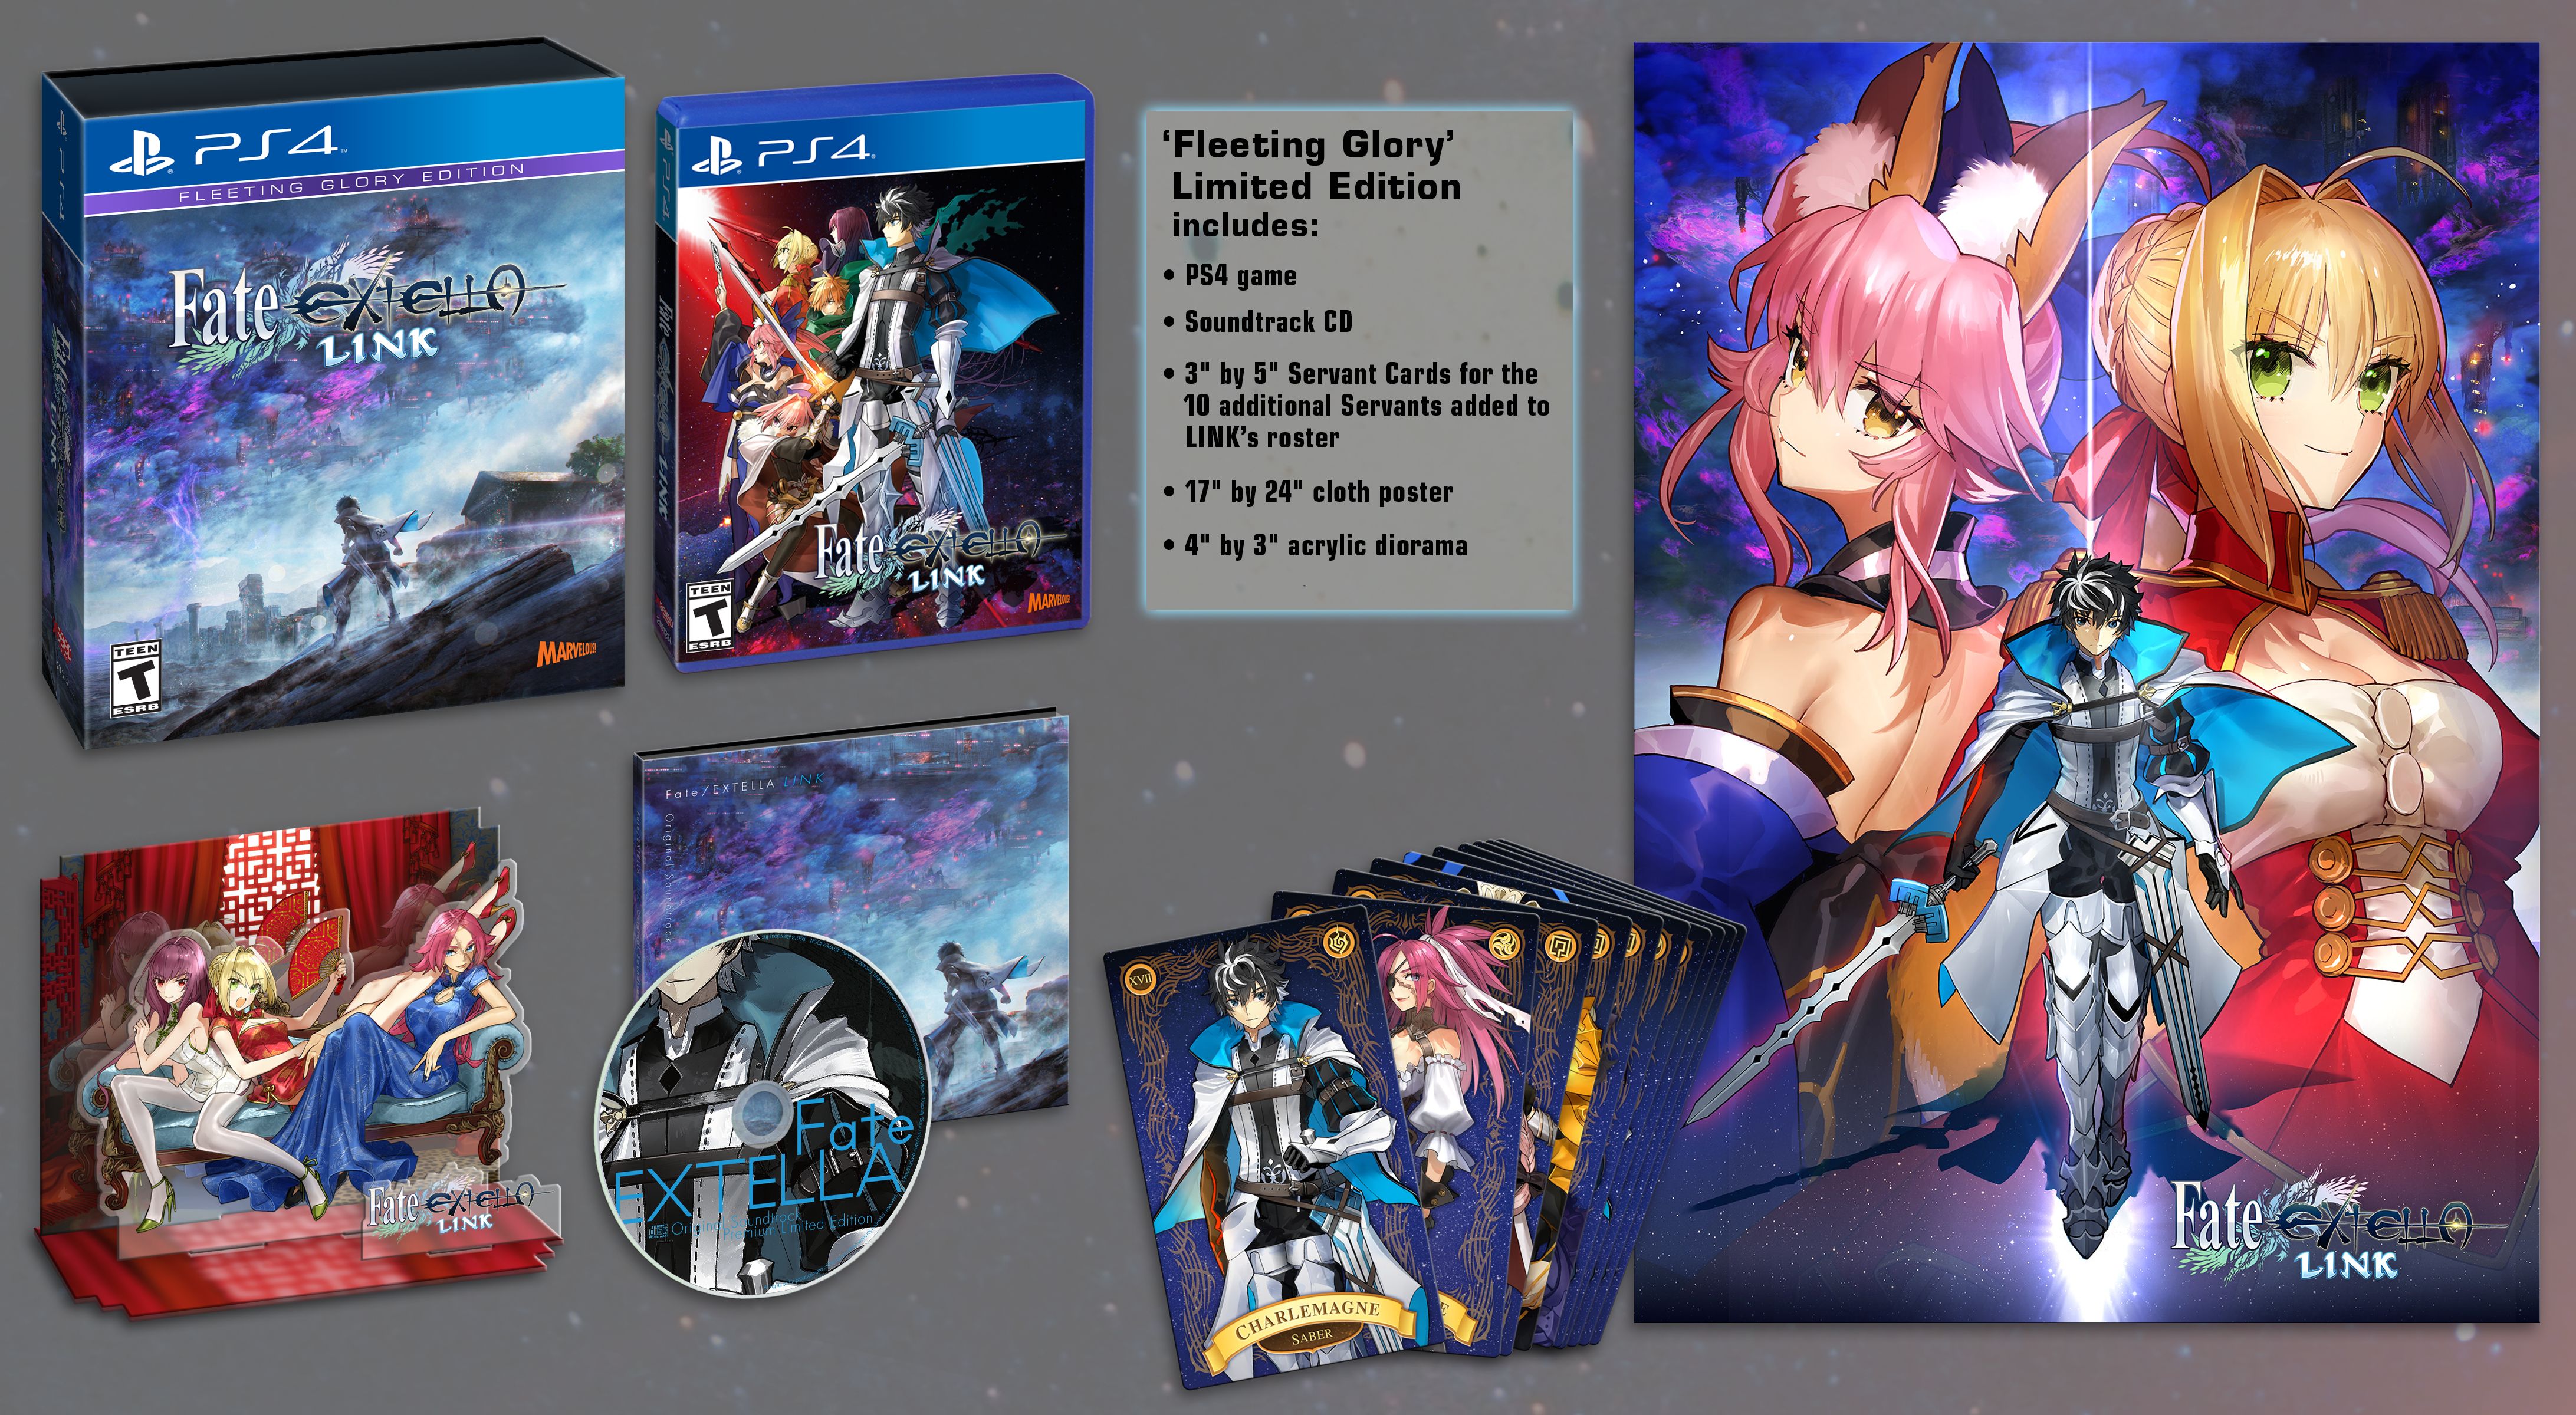 Fate_EXTELLA-Link-Fleeting-Glory-Edition